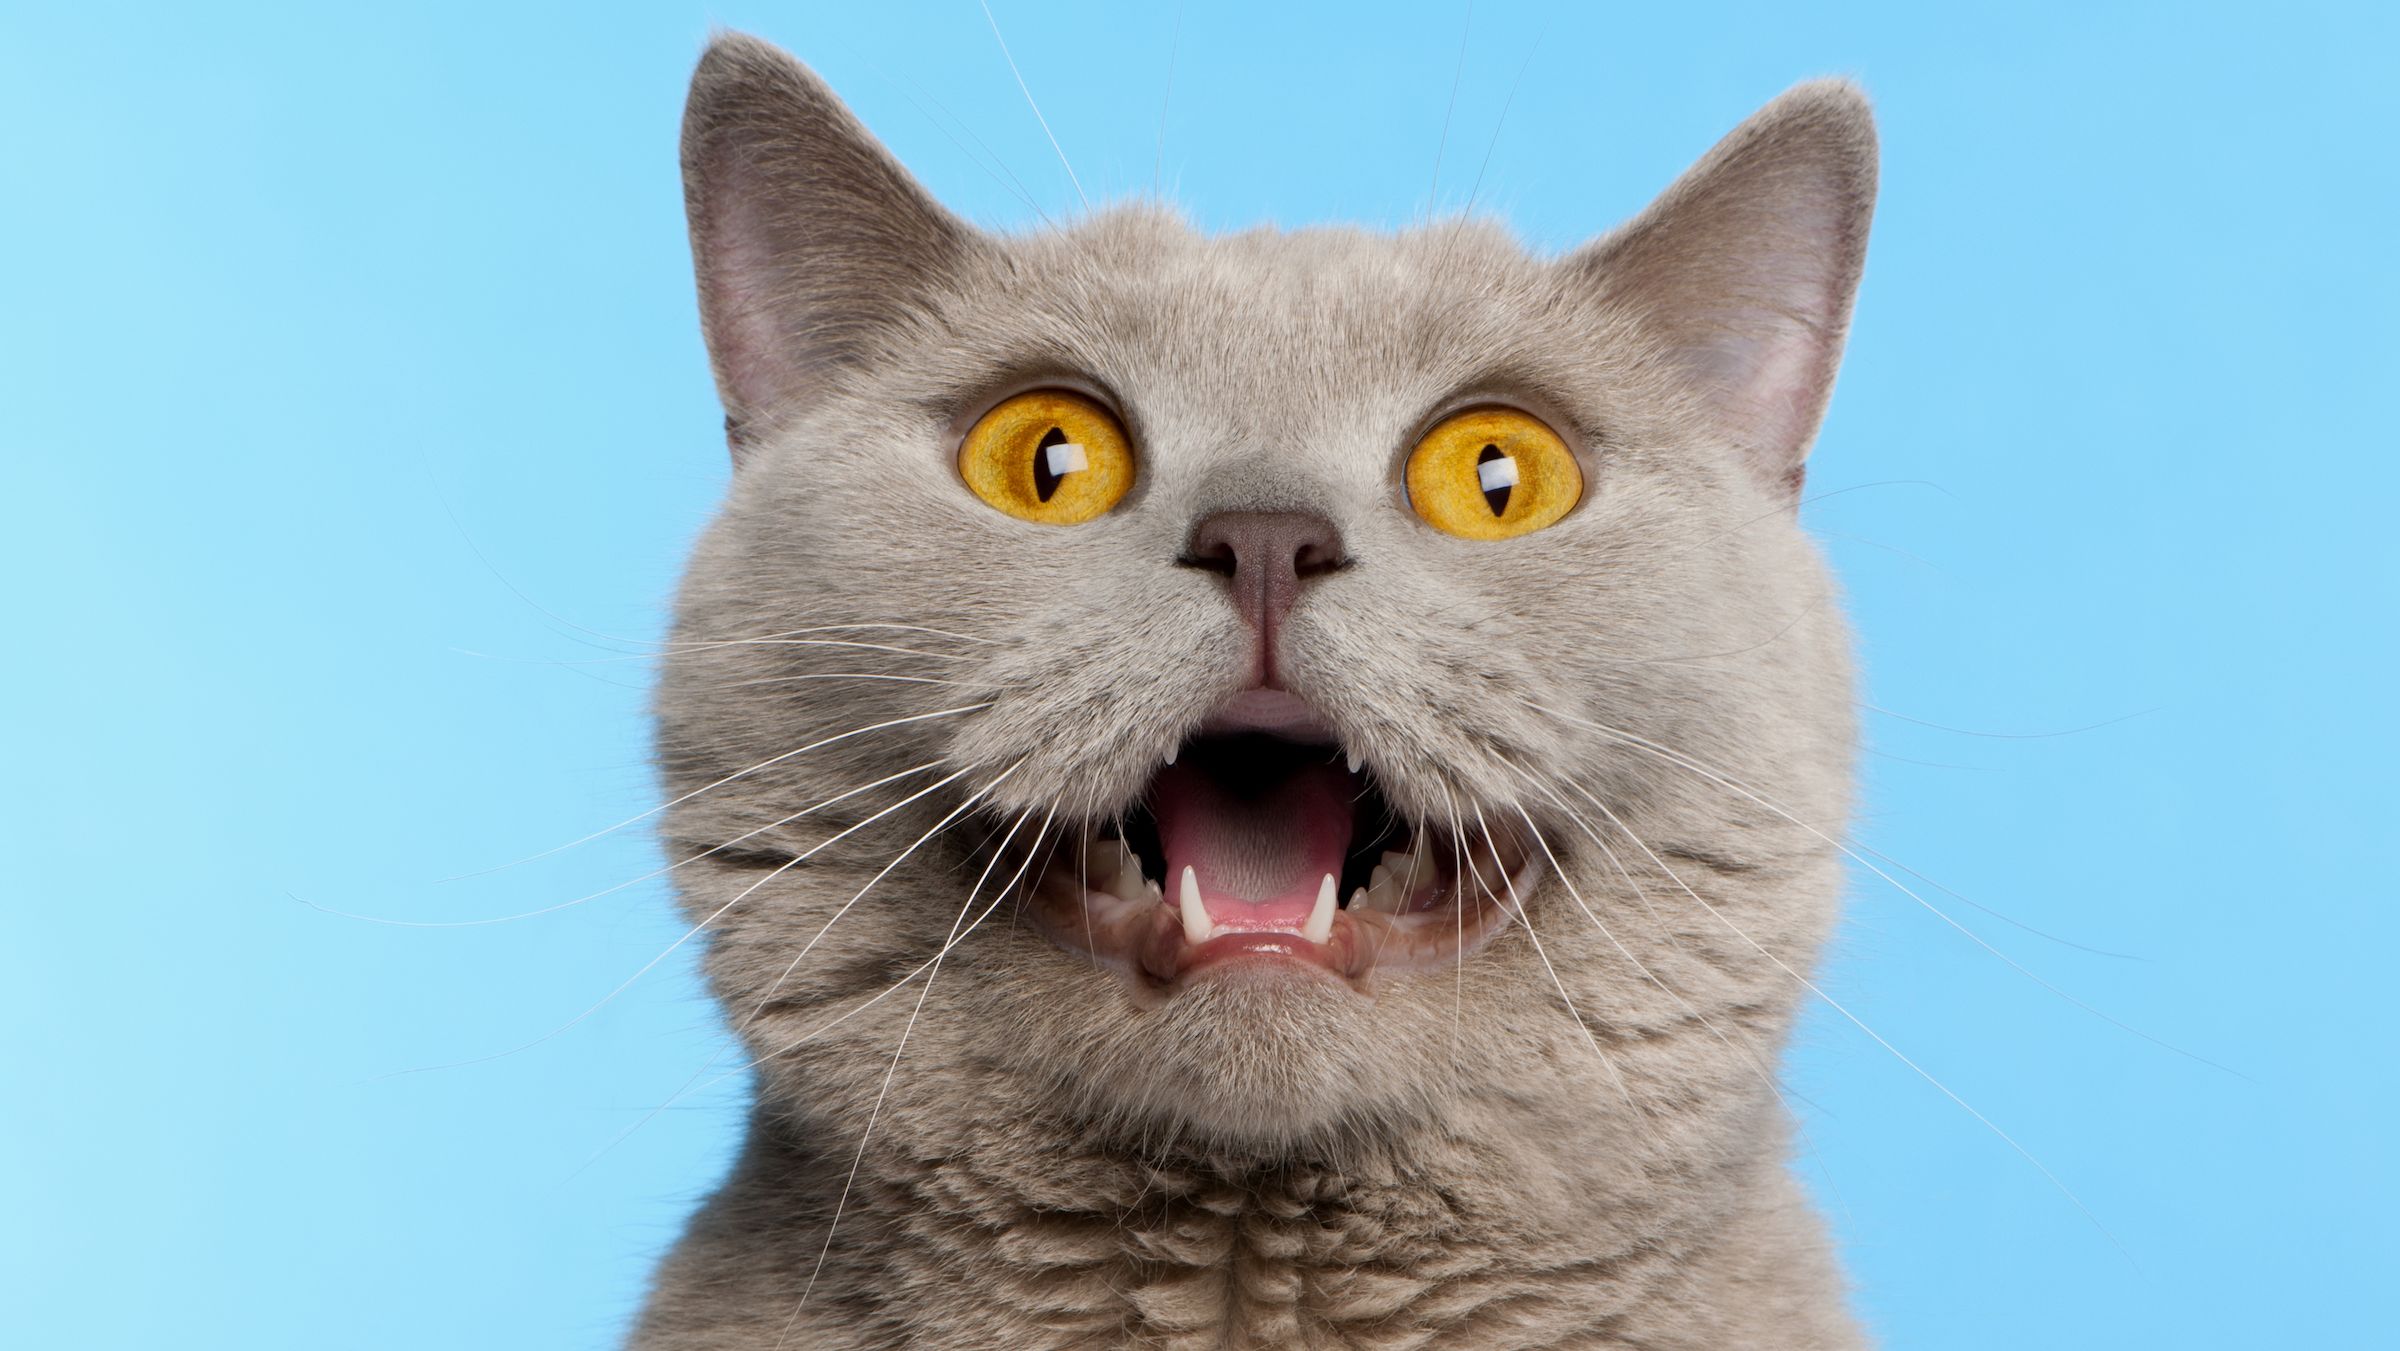 Why Do Cats Leave Their Mouths Open After Smelling Something? Mental